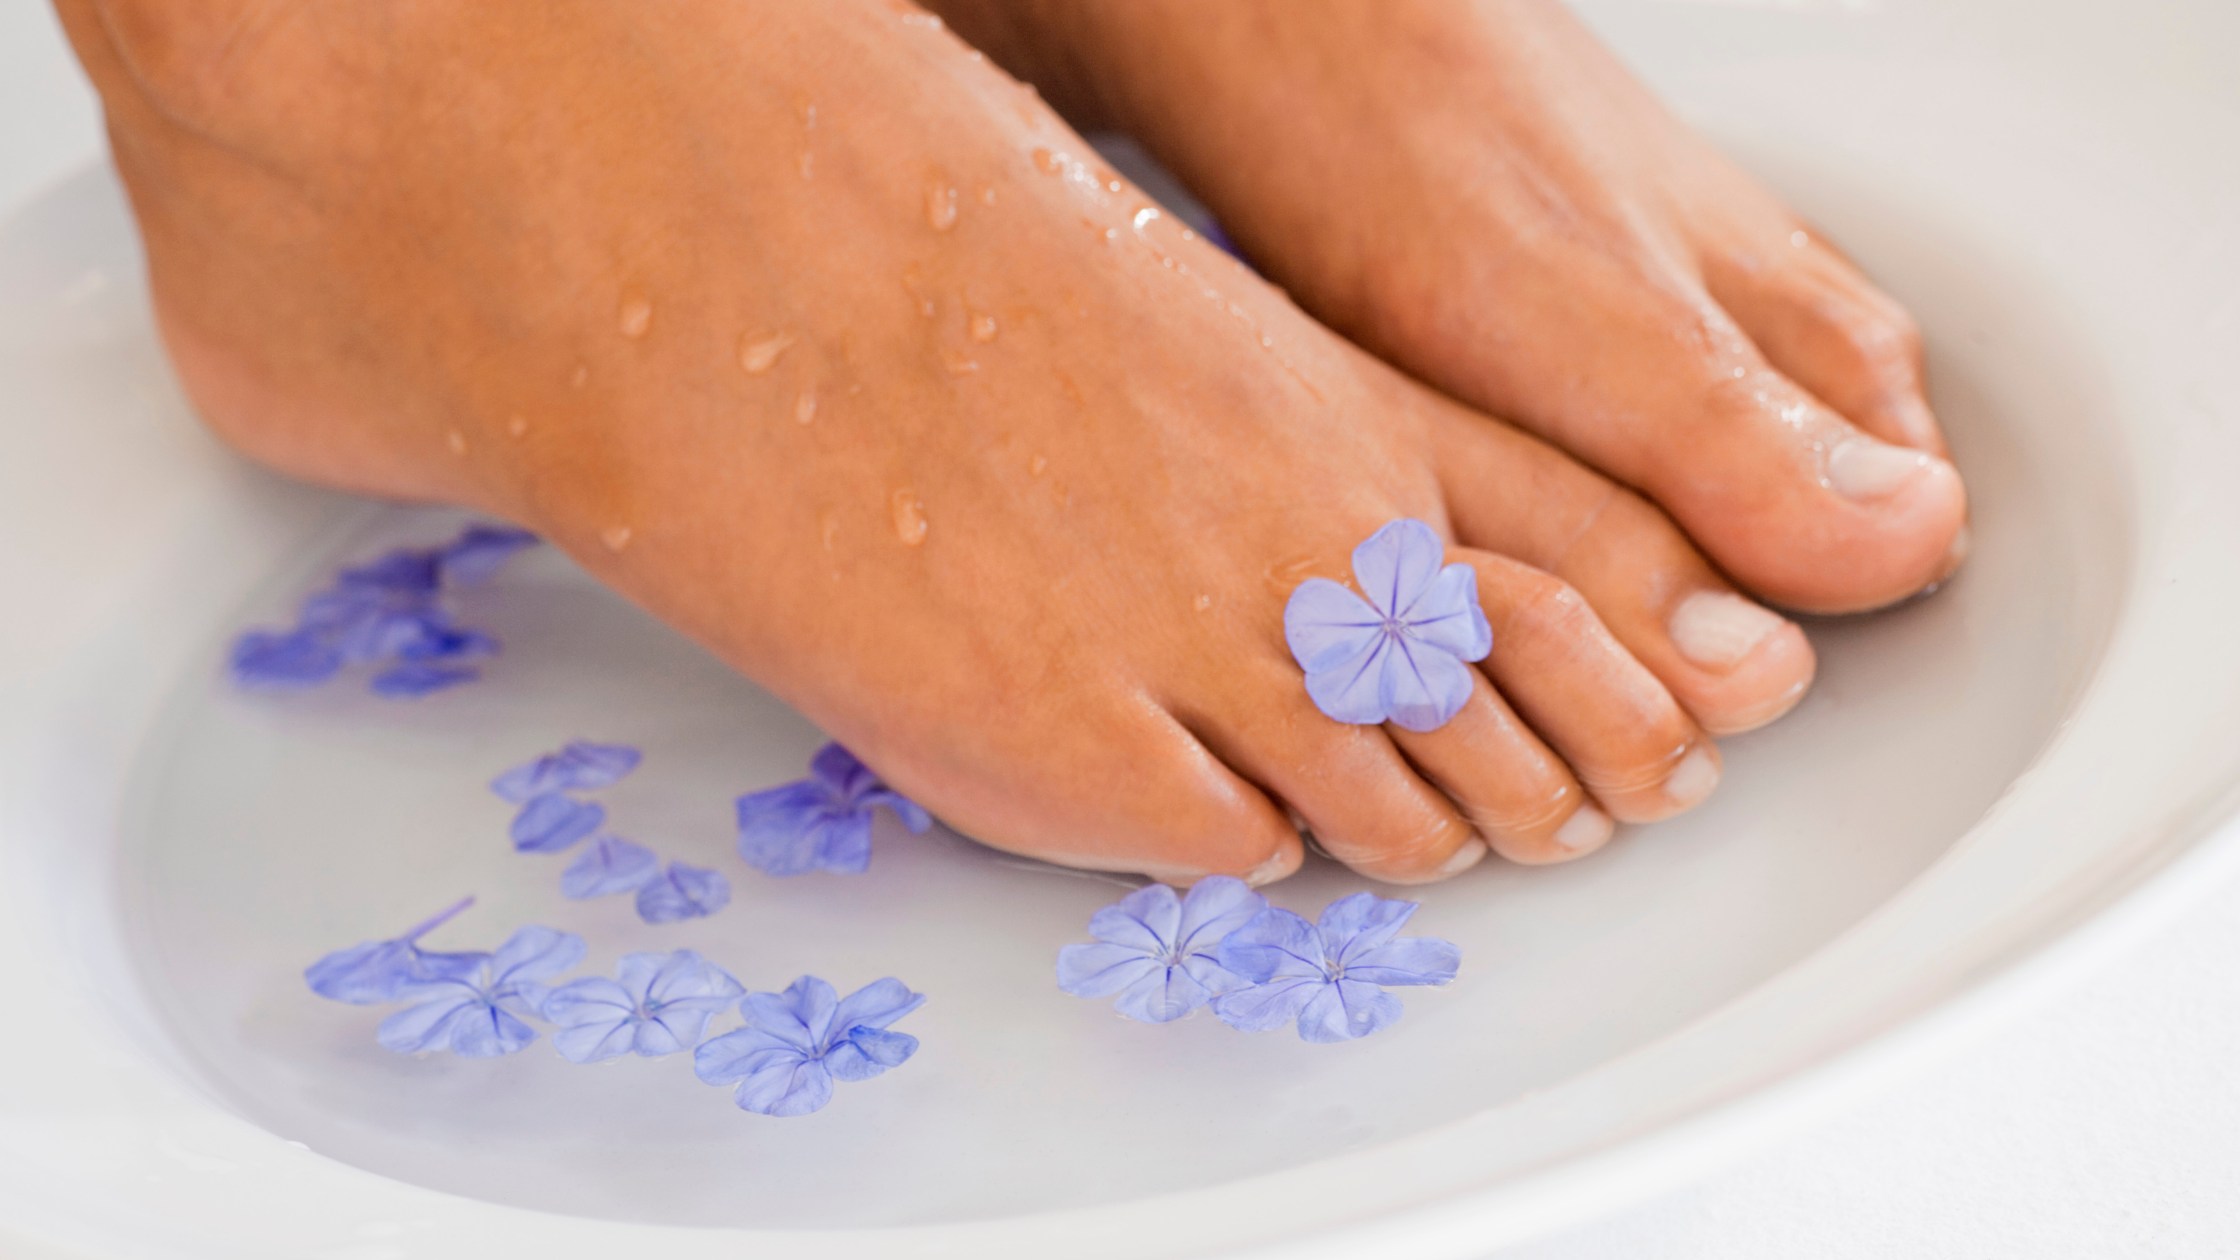 How To Remove Dead Skin From Feet